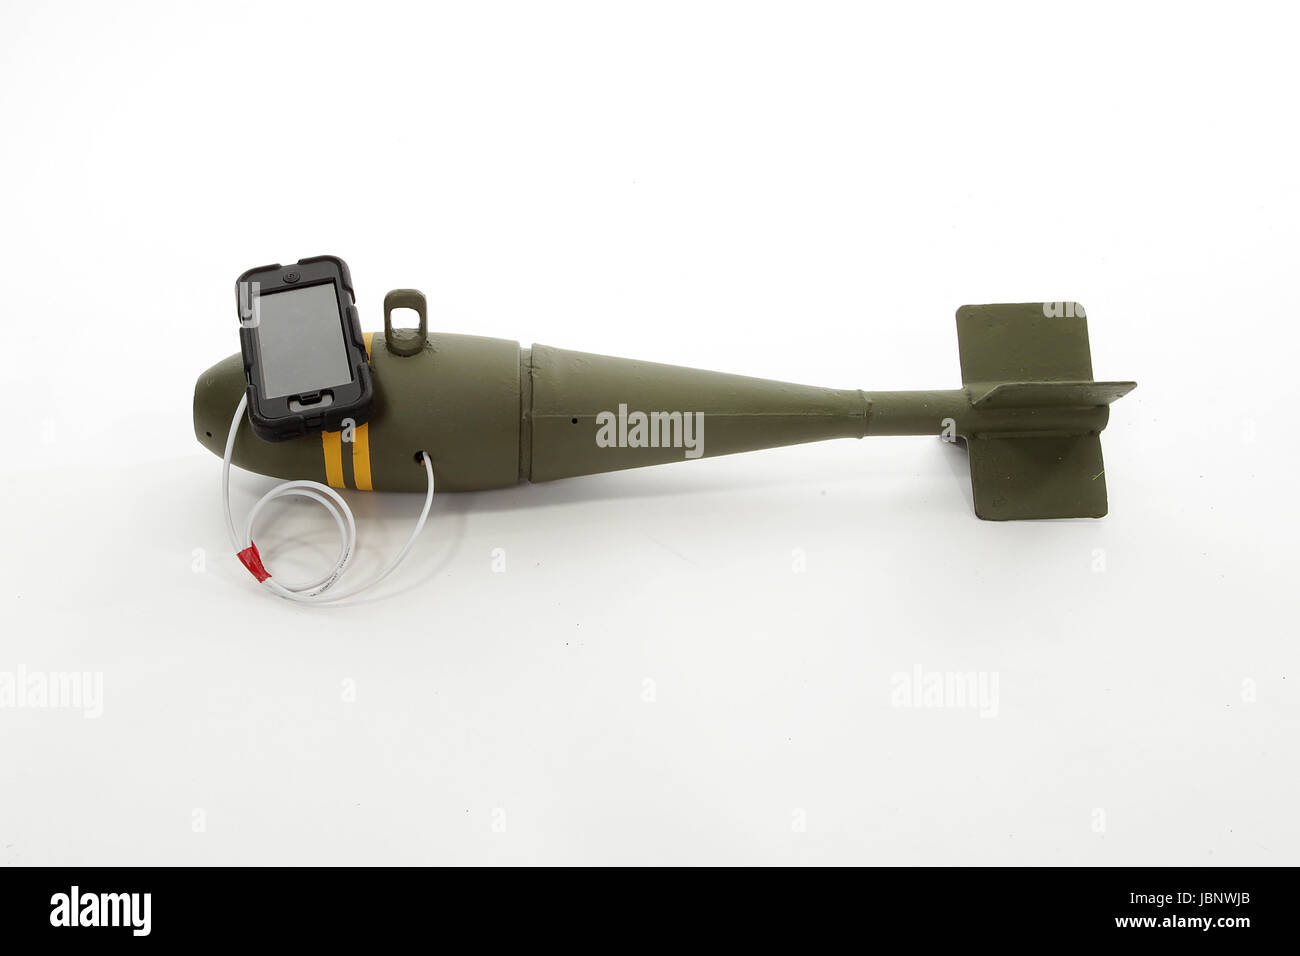 Improvised explosive device, IED, bomb wired to mobile phone, Stock Photo